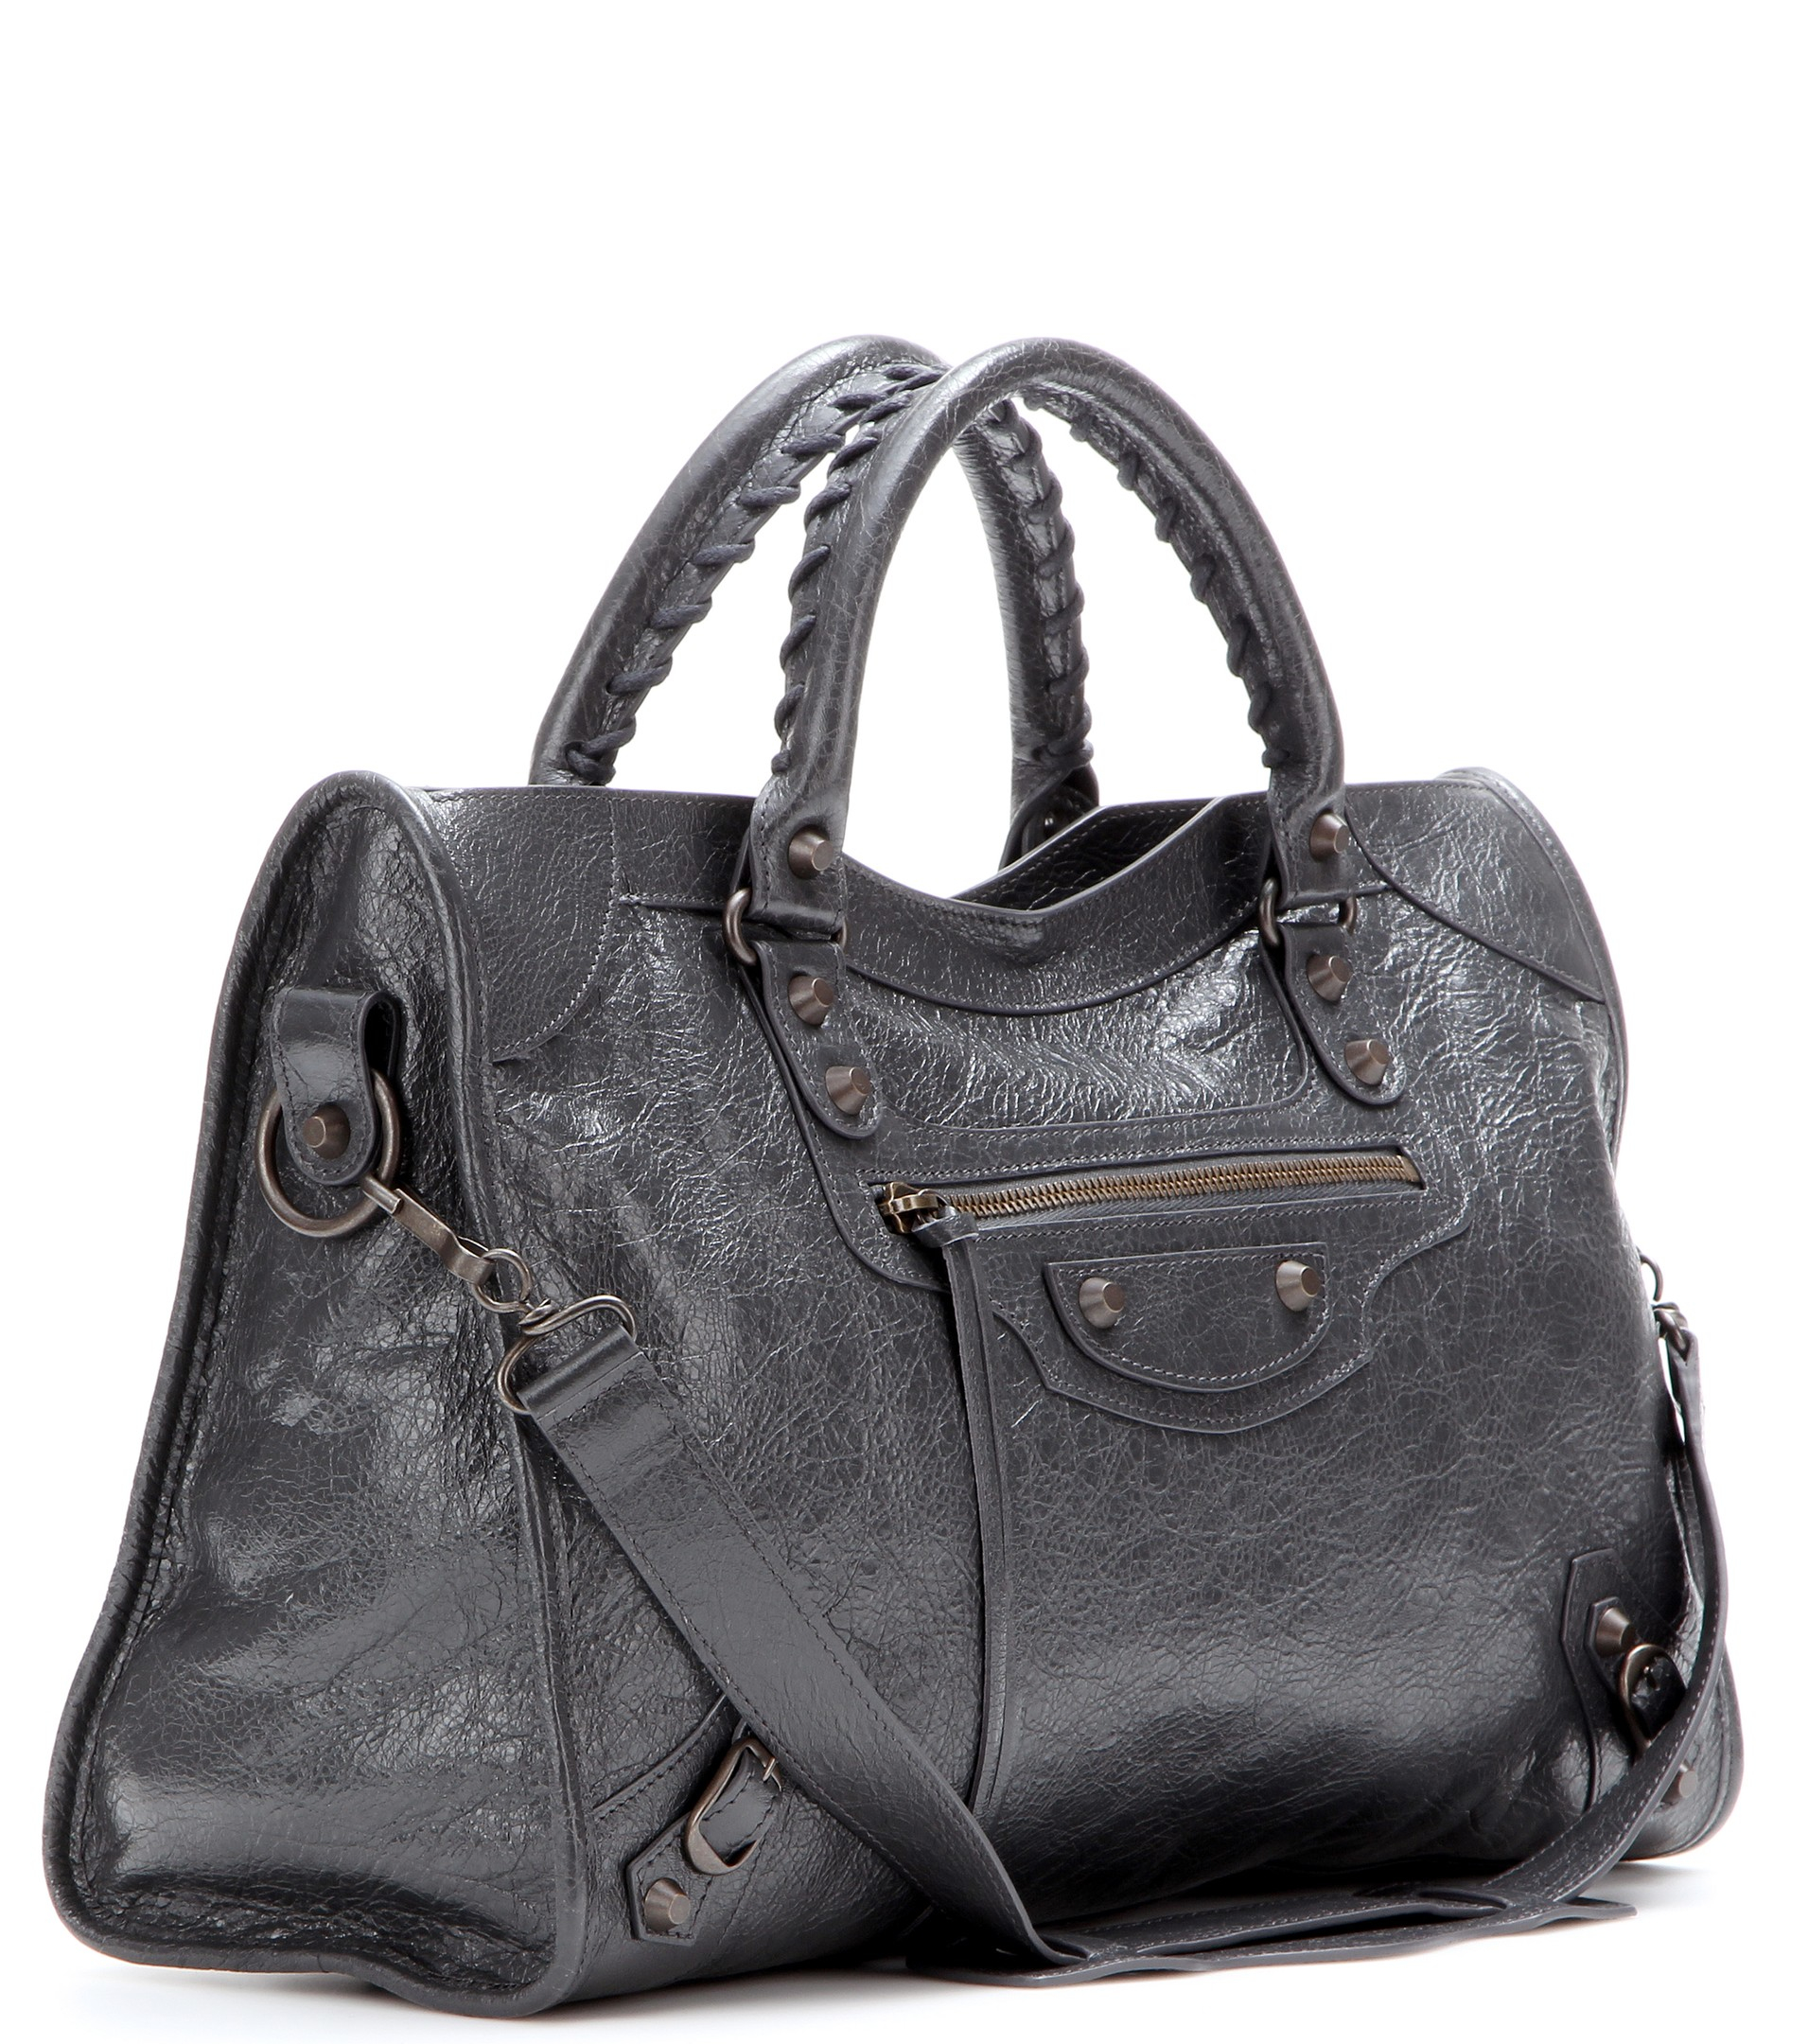 Balenciaga New City S Arena Leather Satchel in Gray - Lyst